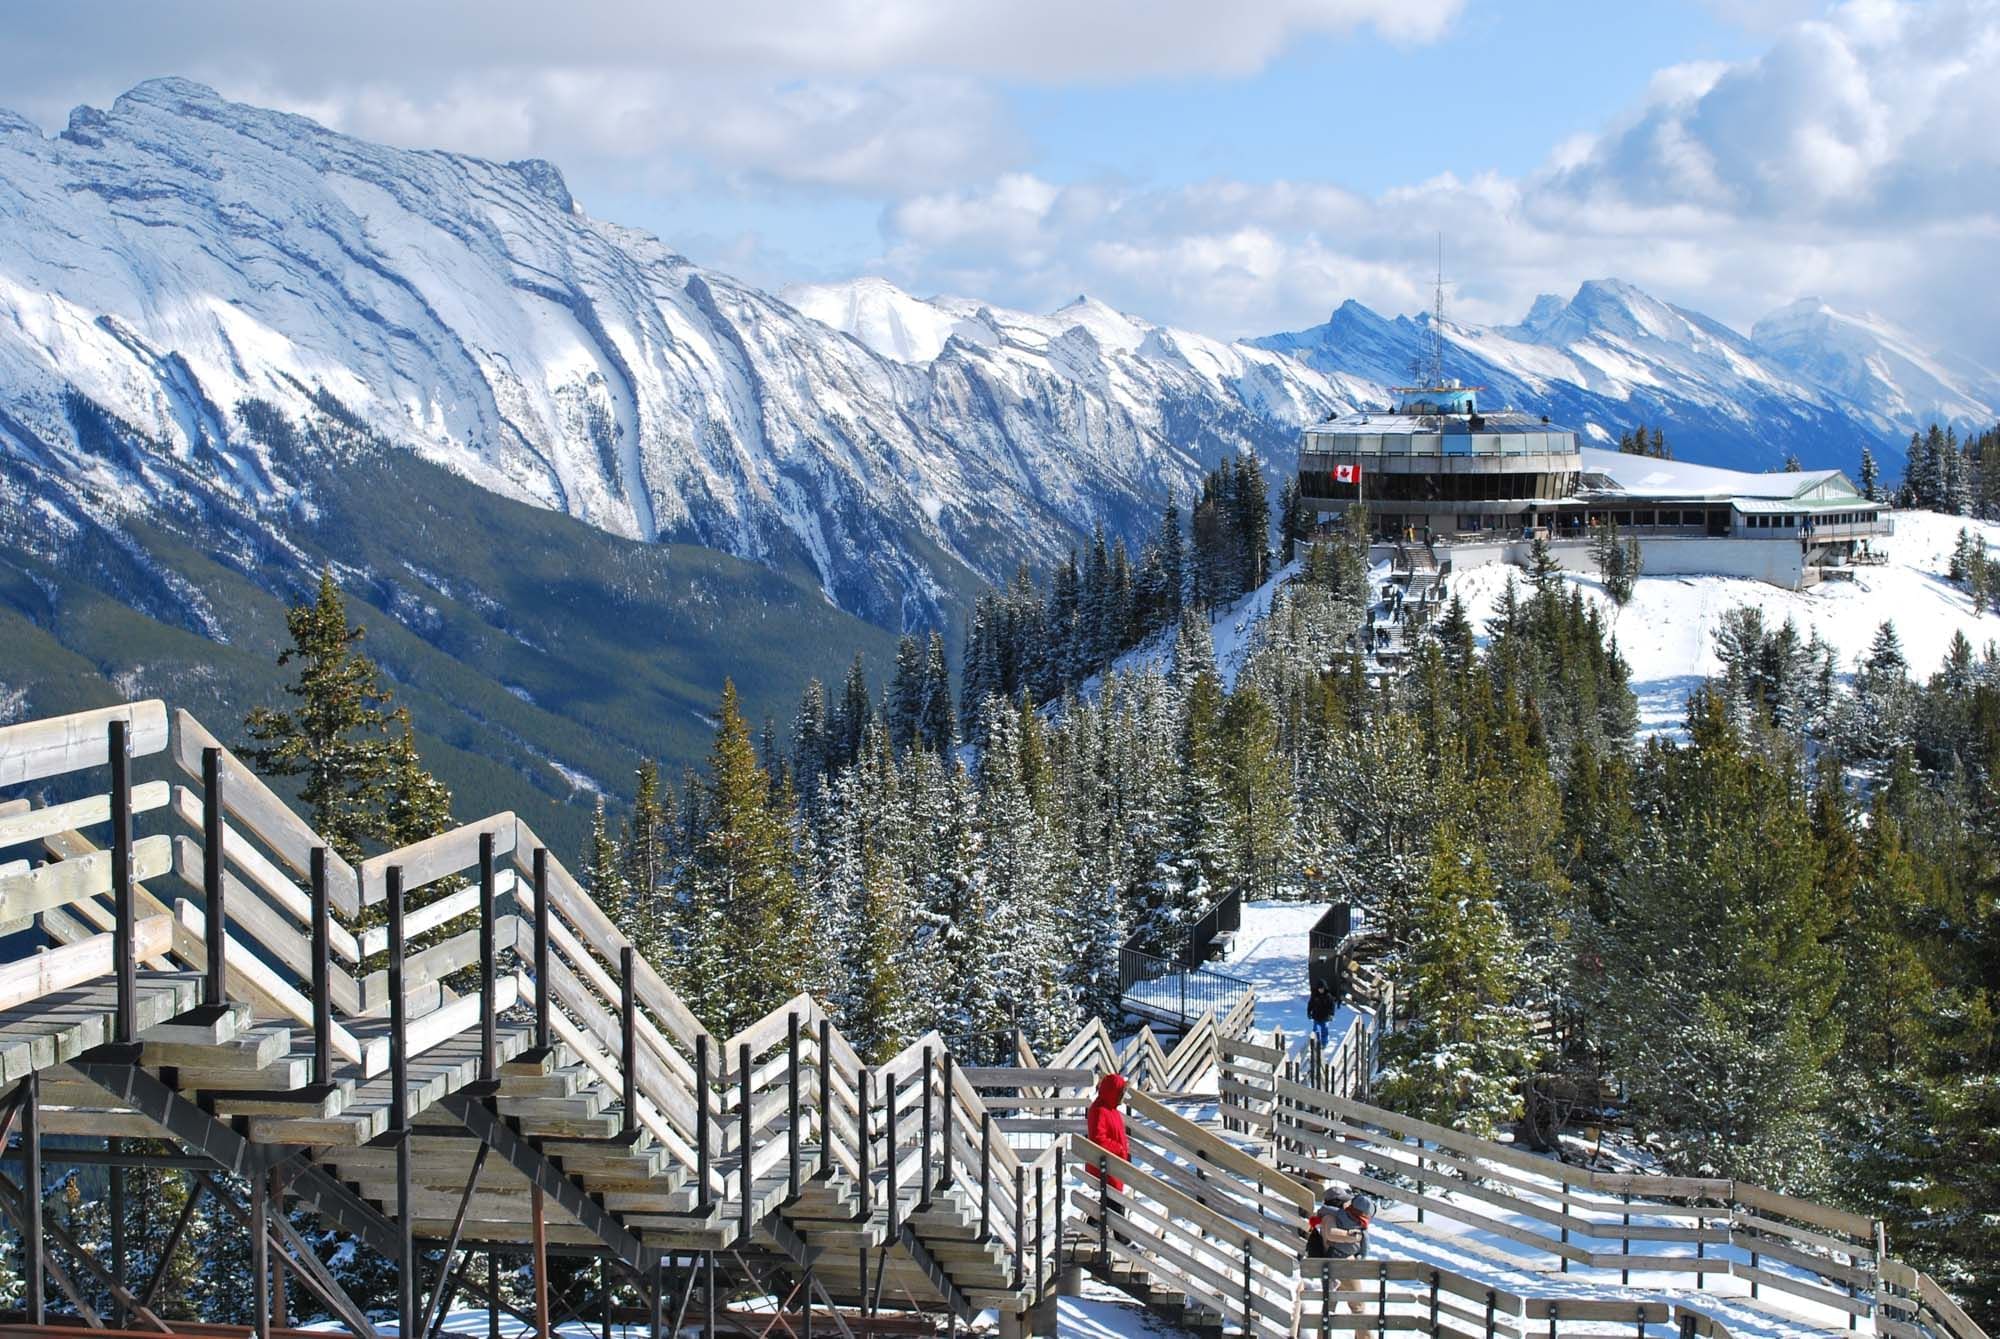 Canada’s iconic mountain town is just an hour or so drive away from Calgary